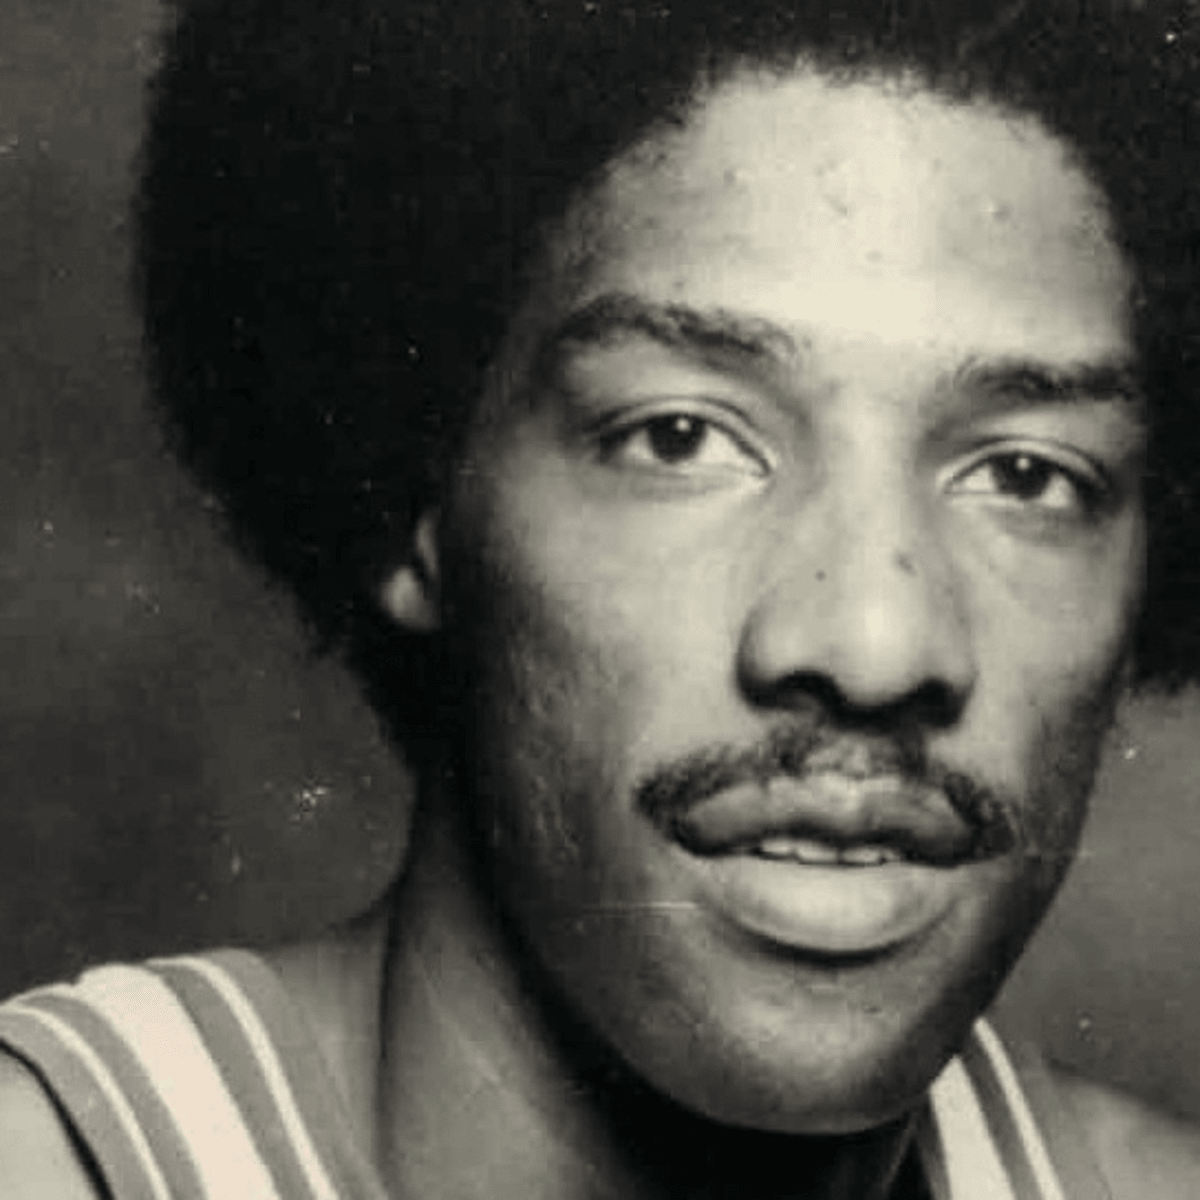 BIT OF HISTORY: How Nets-Knicks rivalry evolved from Dr. J to Brooklyn move  - NetsDaily